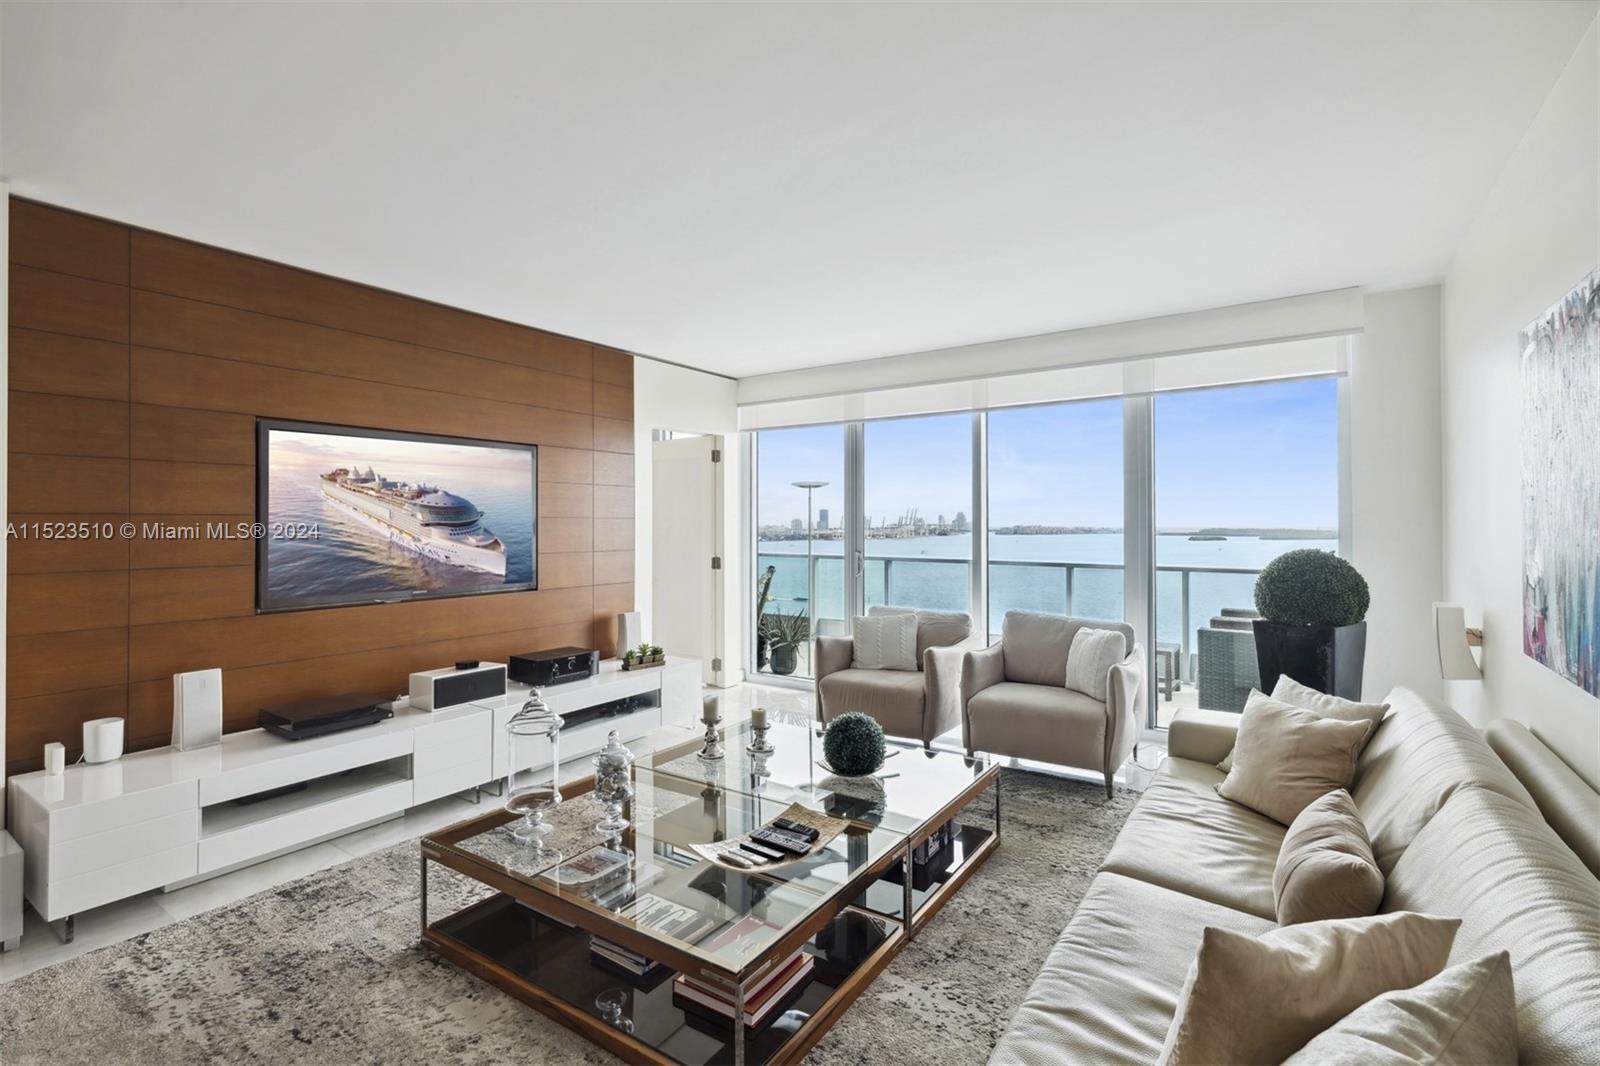 Uncover unmatched Biscayne Bay views from this gem in the Miami skyline. Enjoy vibrant living on spacious balconies, complemented by a private elevator foyer. The residence boasts an elegant kitchen, marble floors, Italian cabinetry, and top-tier appliances. Indulge in world-class amenities—bayfront pools, fitness center, spa, concierge, valet, and a sky-high club room. Perfectly located for easy access to dining and entertainment, bypassing Brickell traffic. Elevate your lifestyle with breathtaking views, luxury, and prime Miami living—a sophisticated sanctuary in the heart of the city.

Act quickly – seize the final opportunity for a three-bedroom residence in the building. Don't miss out.